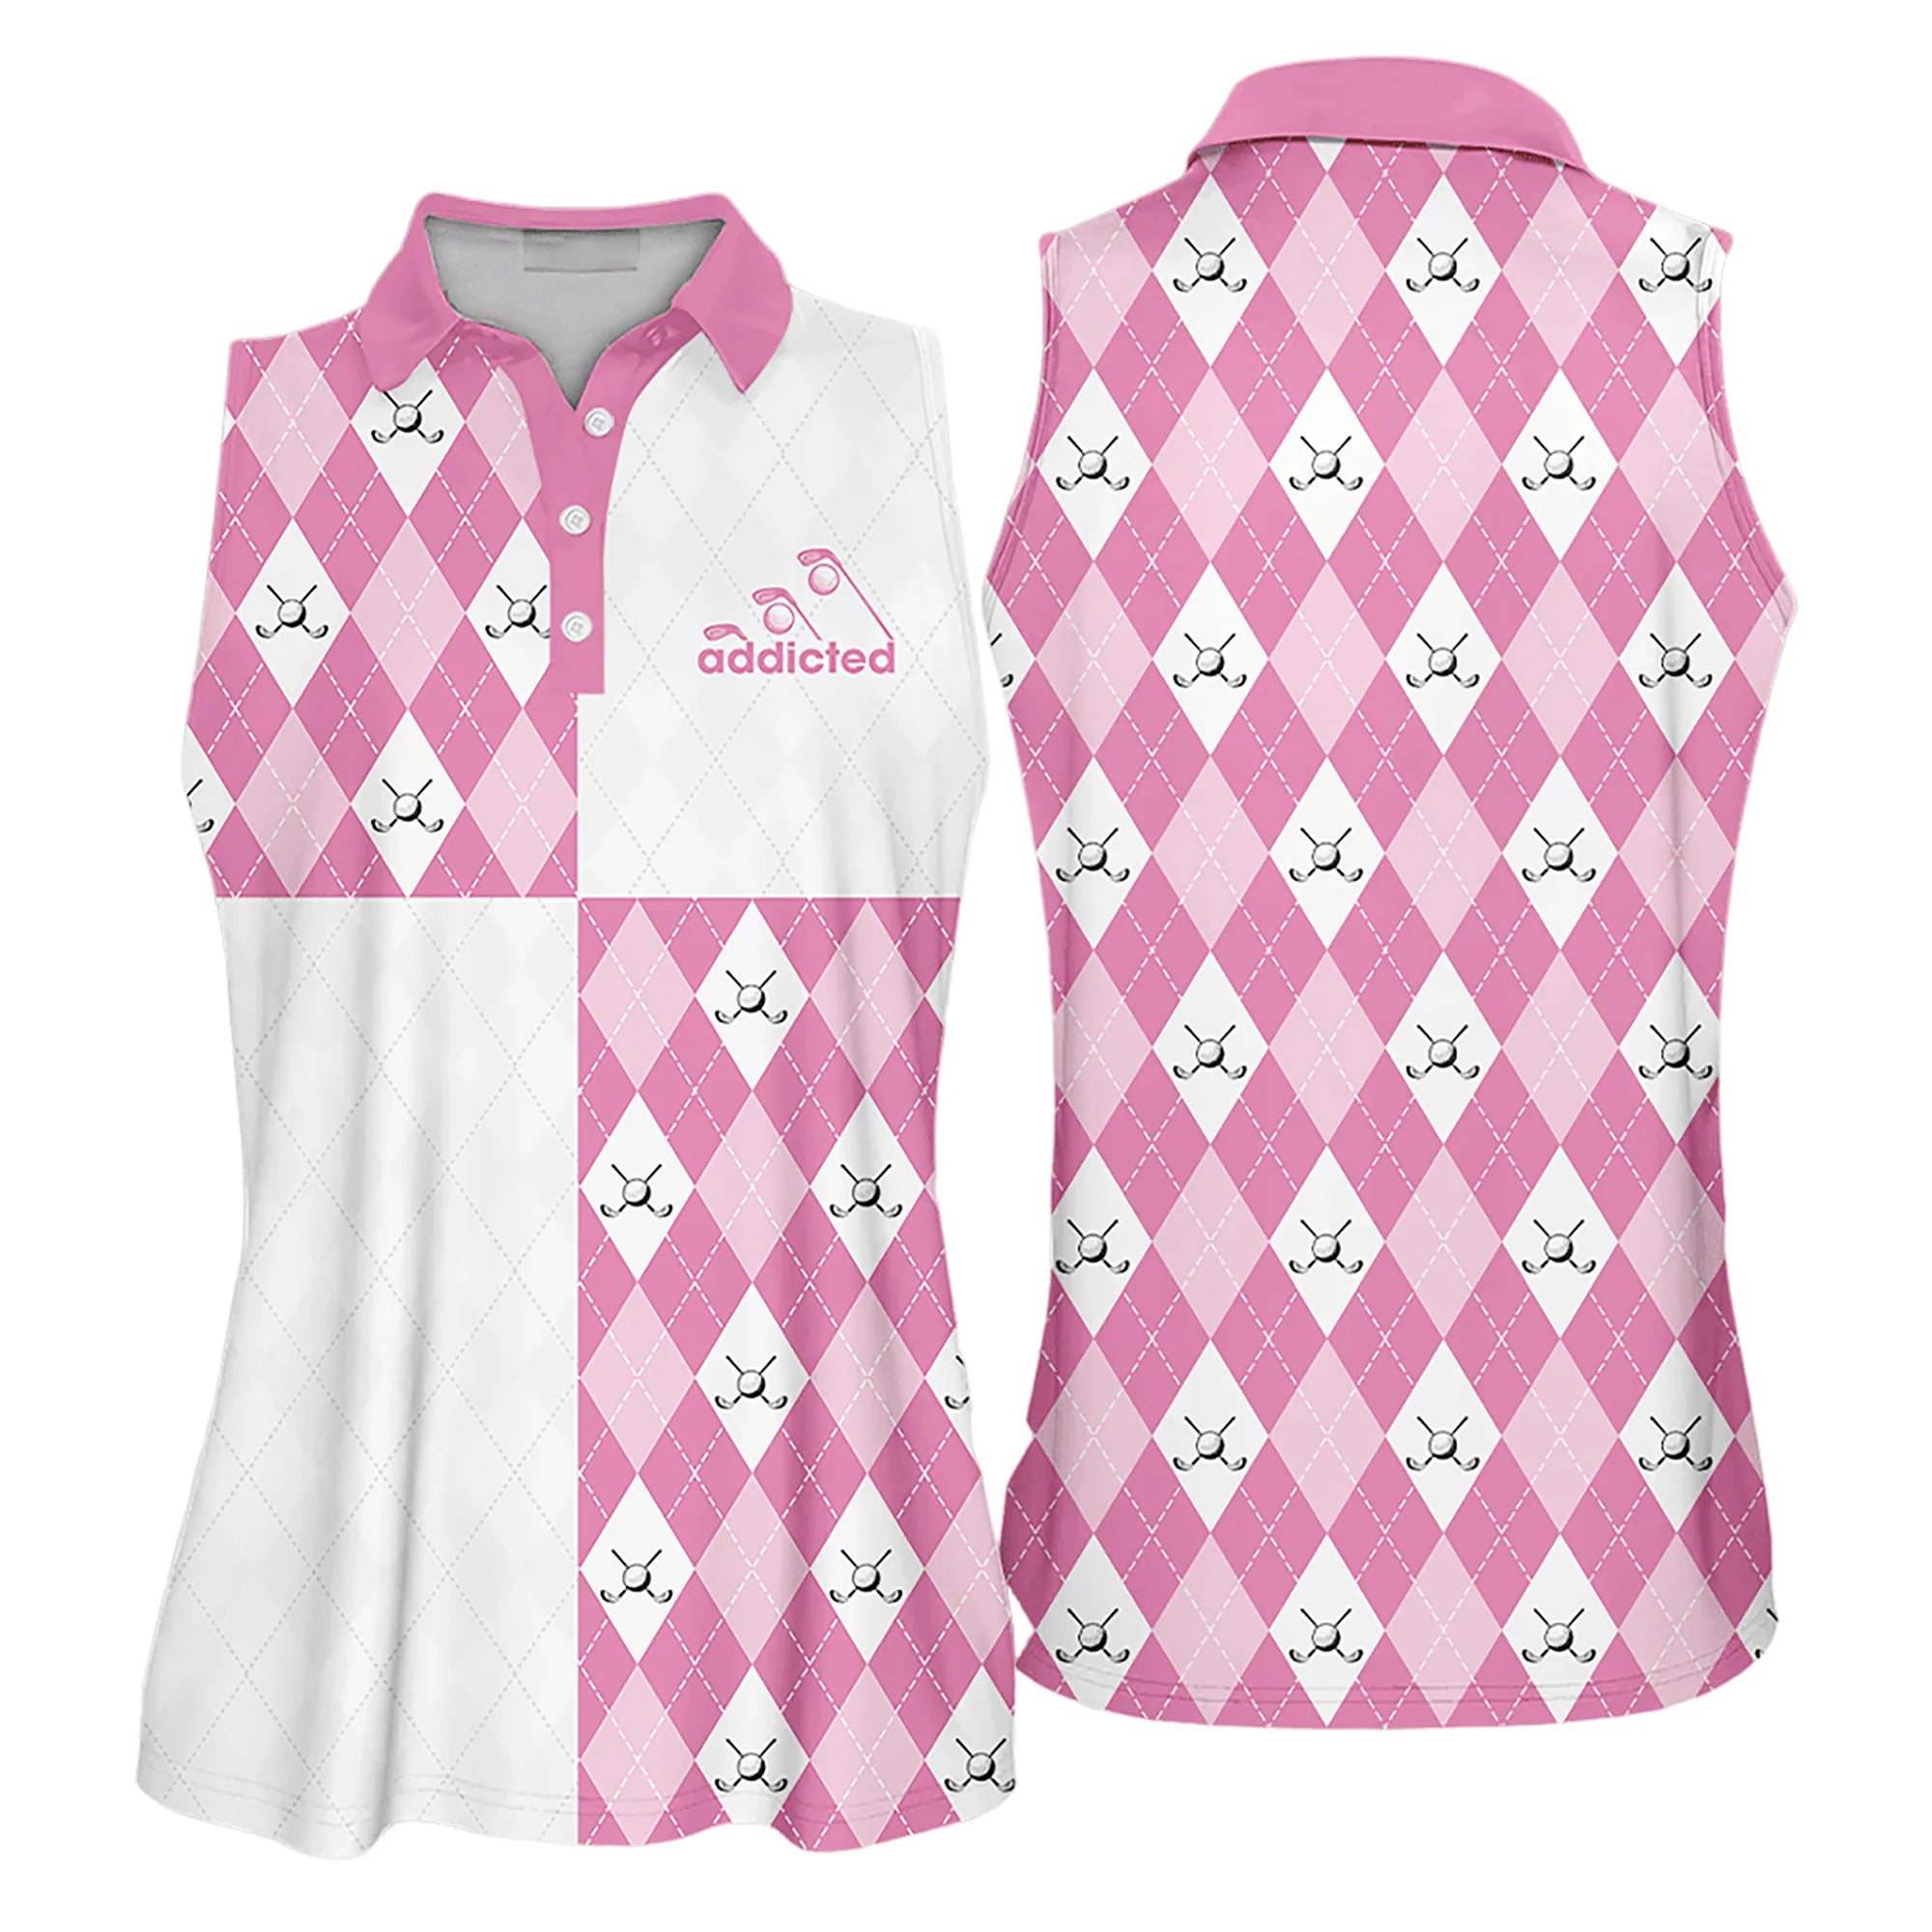 Golf Women Sleeveless Athleisure Polo Shirt, Pink Argyle Pattern Dry Fit - Gift For Golfers, Female, Golf Lovers, Mother's Day